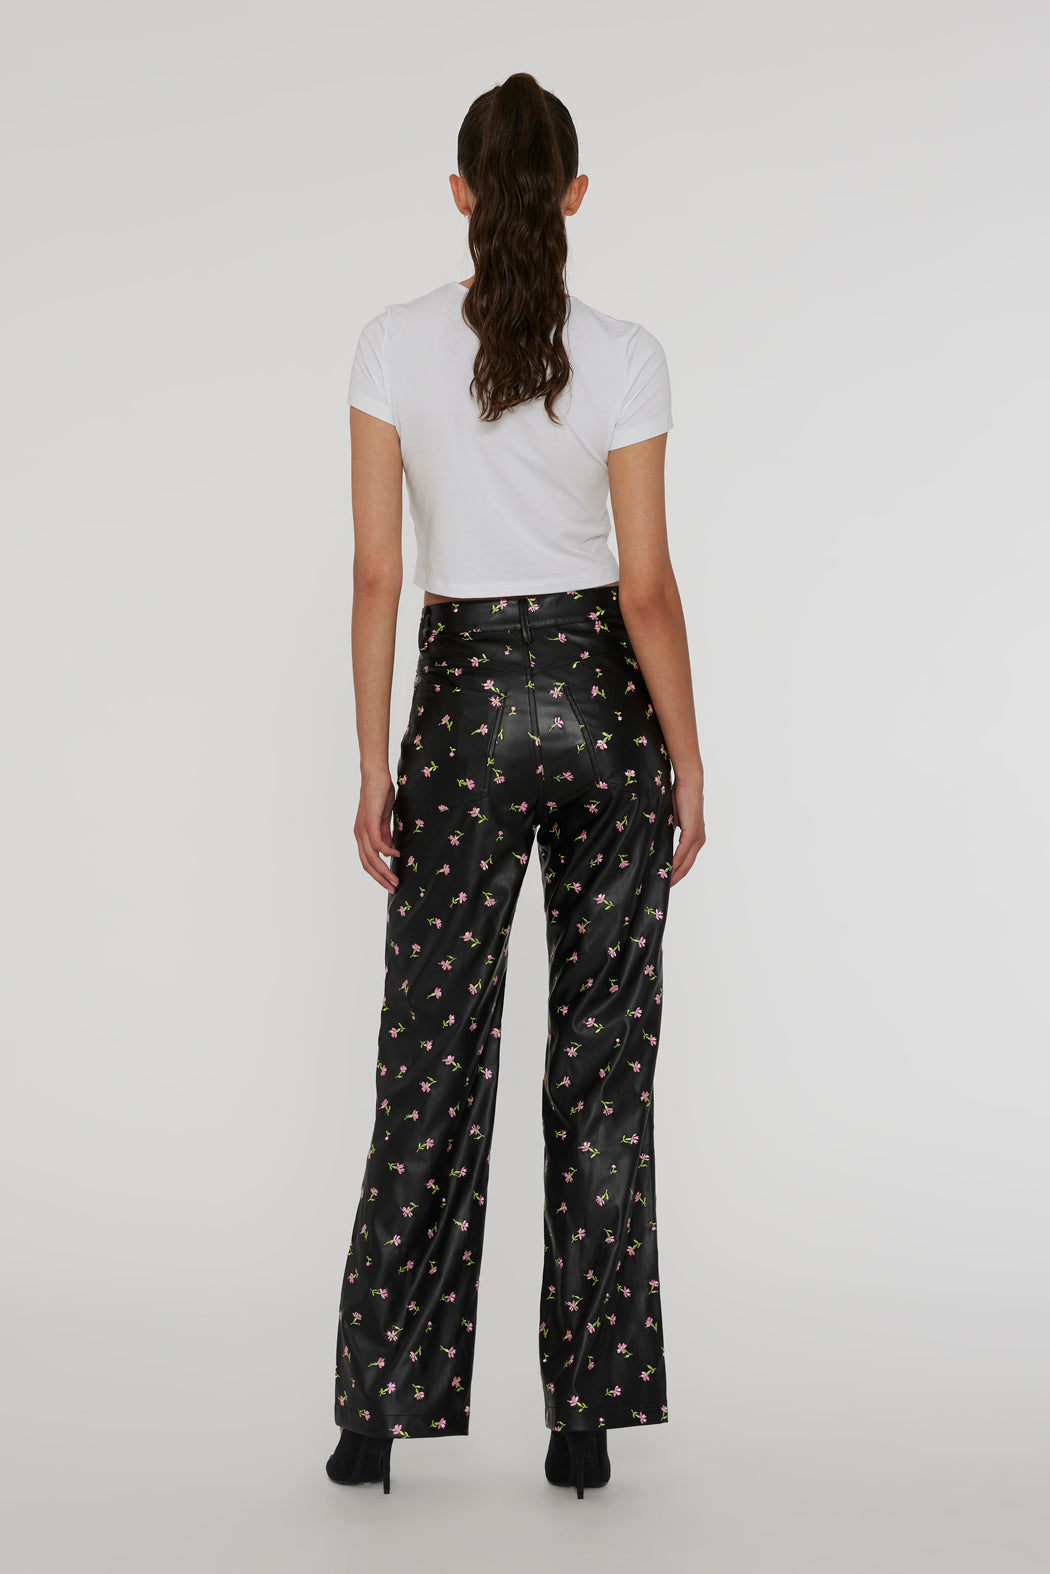 Printed Straight Pants Tiny Pink Buttercup + Tap Shoe Comb.